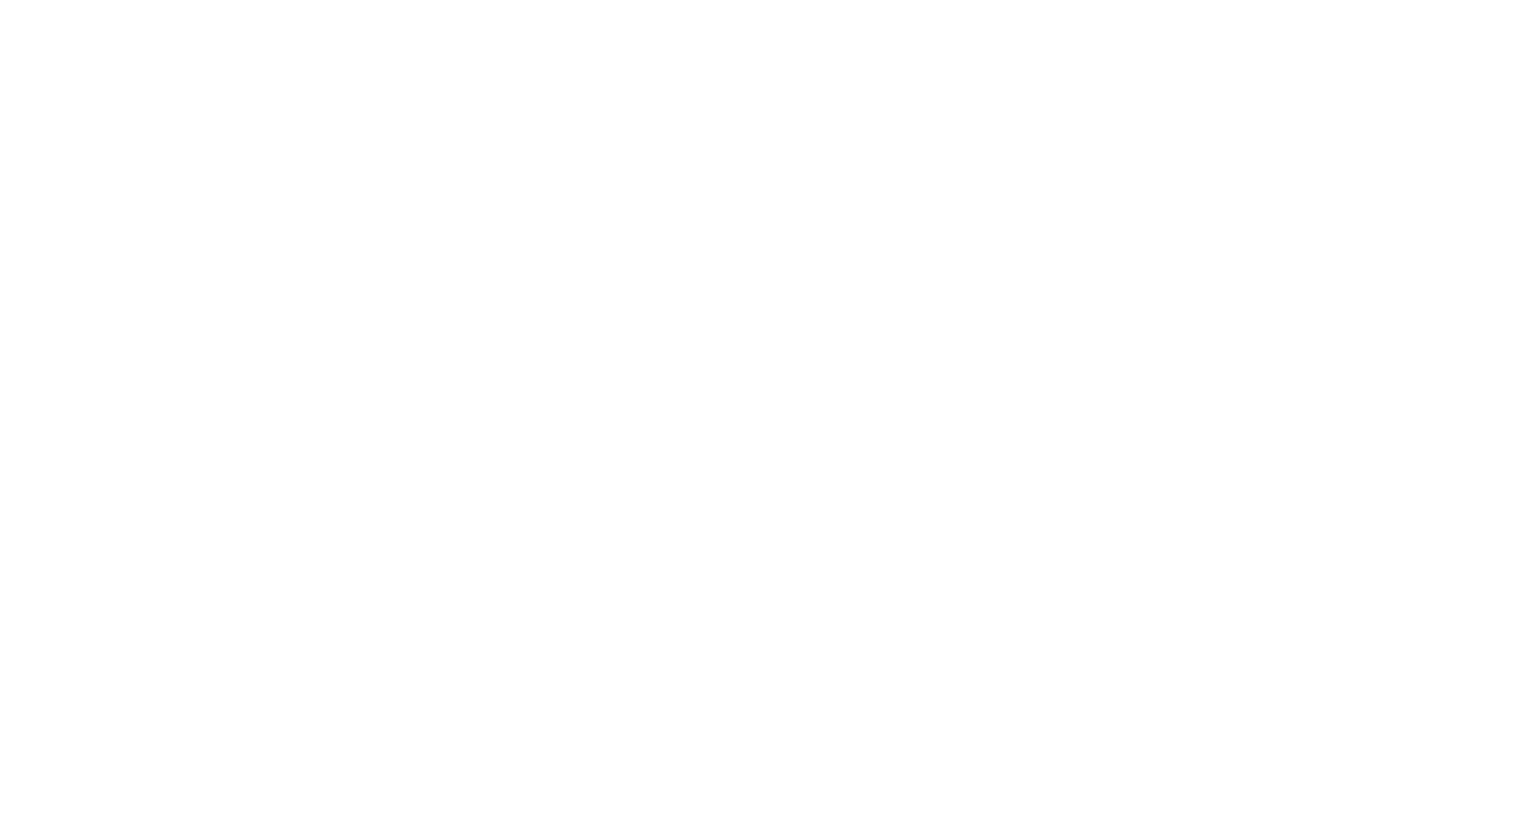 Close Encounters of the Third Kind and Brainstorm